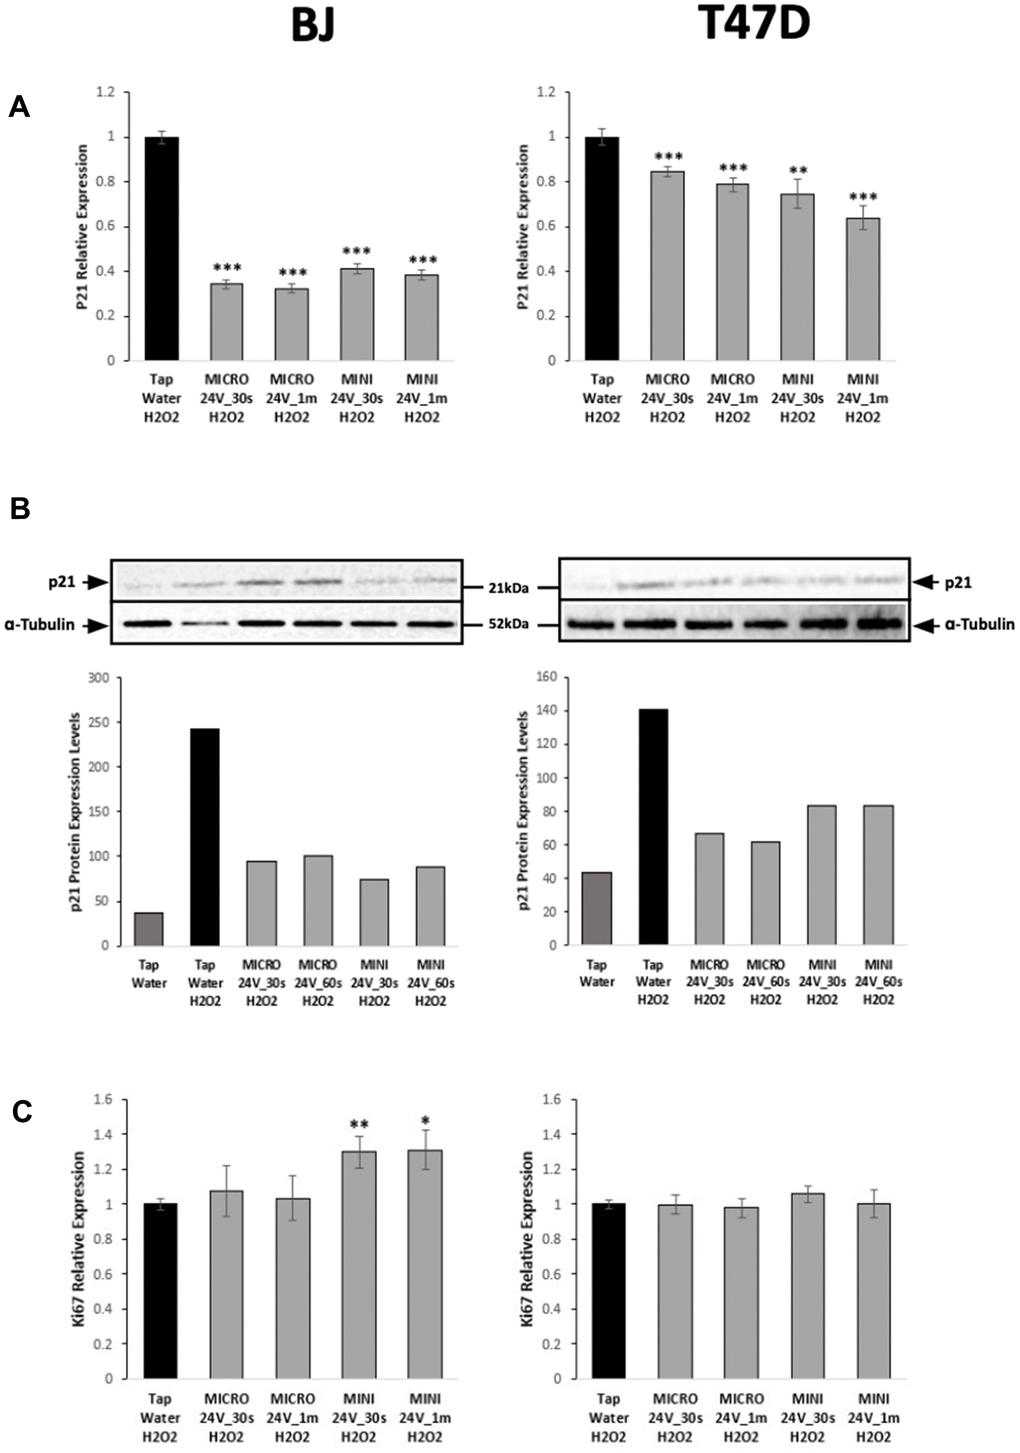 WEW significantly reduces the expression of p21 but does not affect proliferation of BJ and T47D cells. (A) Relative mRNA level of the p21 gene in BJ senescent cells and T47D senescent cells treated with WEW compared to senescent cells treated with tap water. (B) Protein level expression of p21 determined by western blot analysis (top panel: picture of the blots; bottom panel: quantification). Tubulin was used as internal loading control. (C) Relative mRNA level of the Ki67 gene in BJ senescent cells and T47D senescent cells treated with WEW compared to senescent cells treated with tap water. The graphs represent the mean ±SEM from three independent experiments. Significance was calculated by a two-tailed Student’s t test. *P **P P 